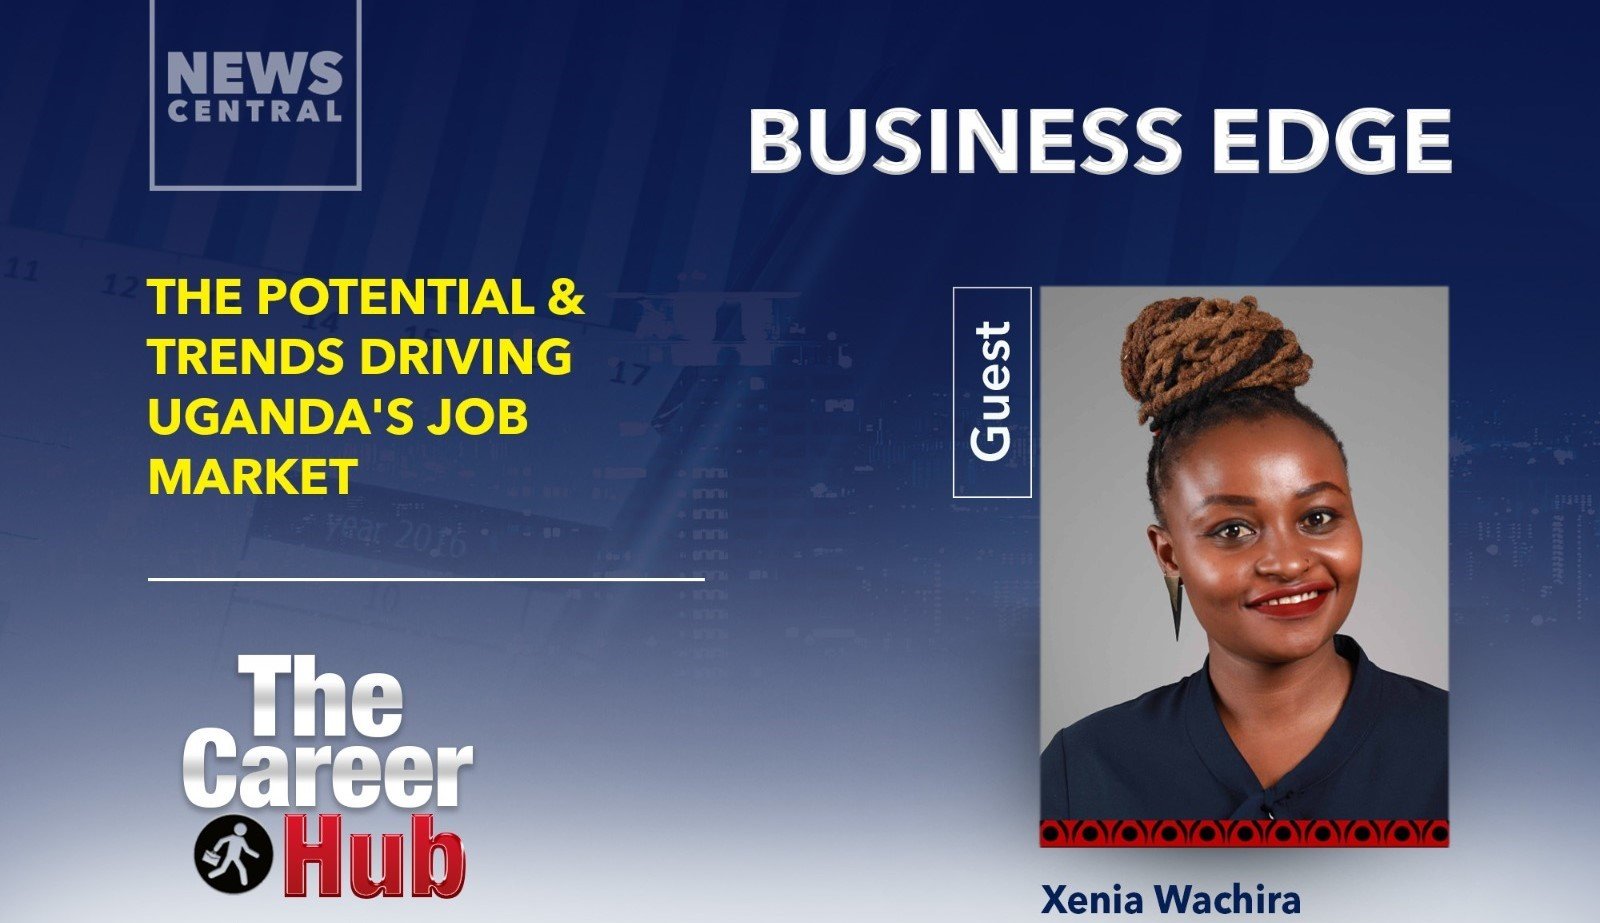 News Central TV featured our country manager, Xenia Wachira. She spoke about the potential and trends driving Uganda's job market..